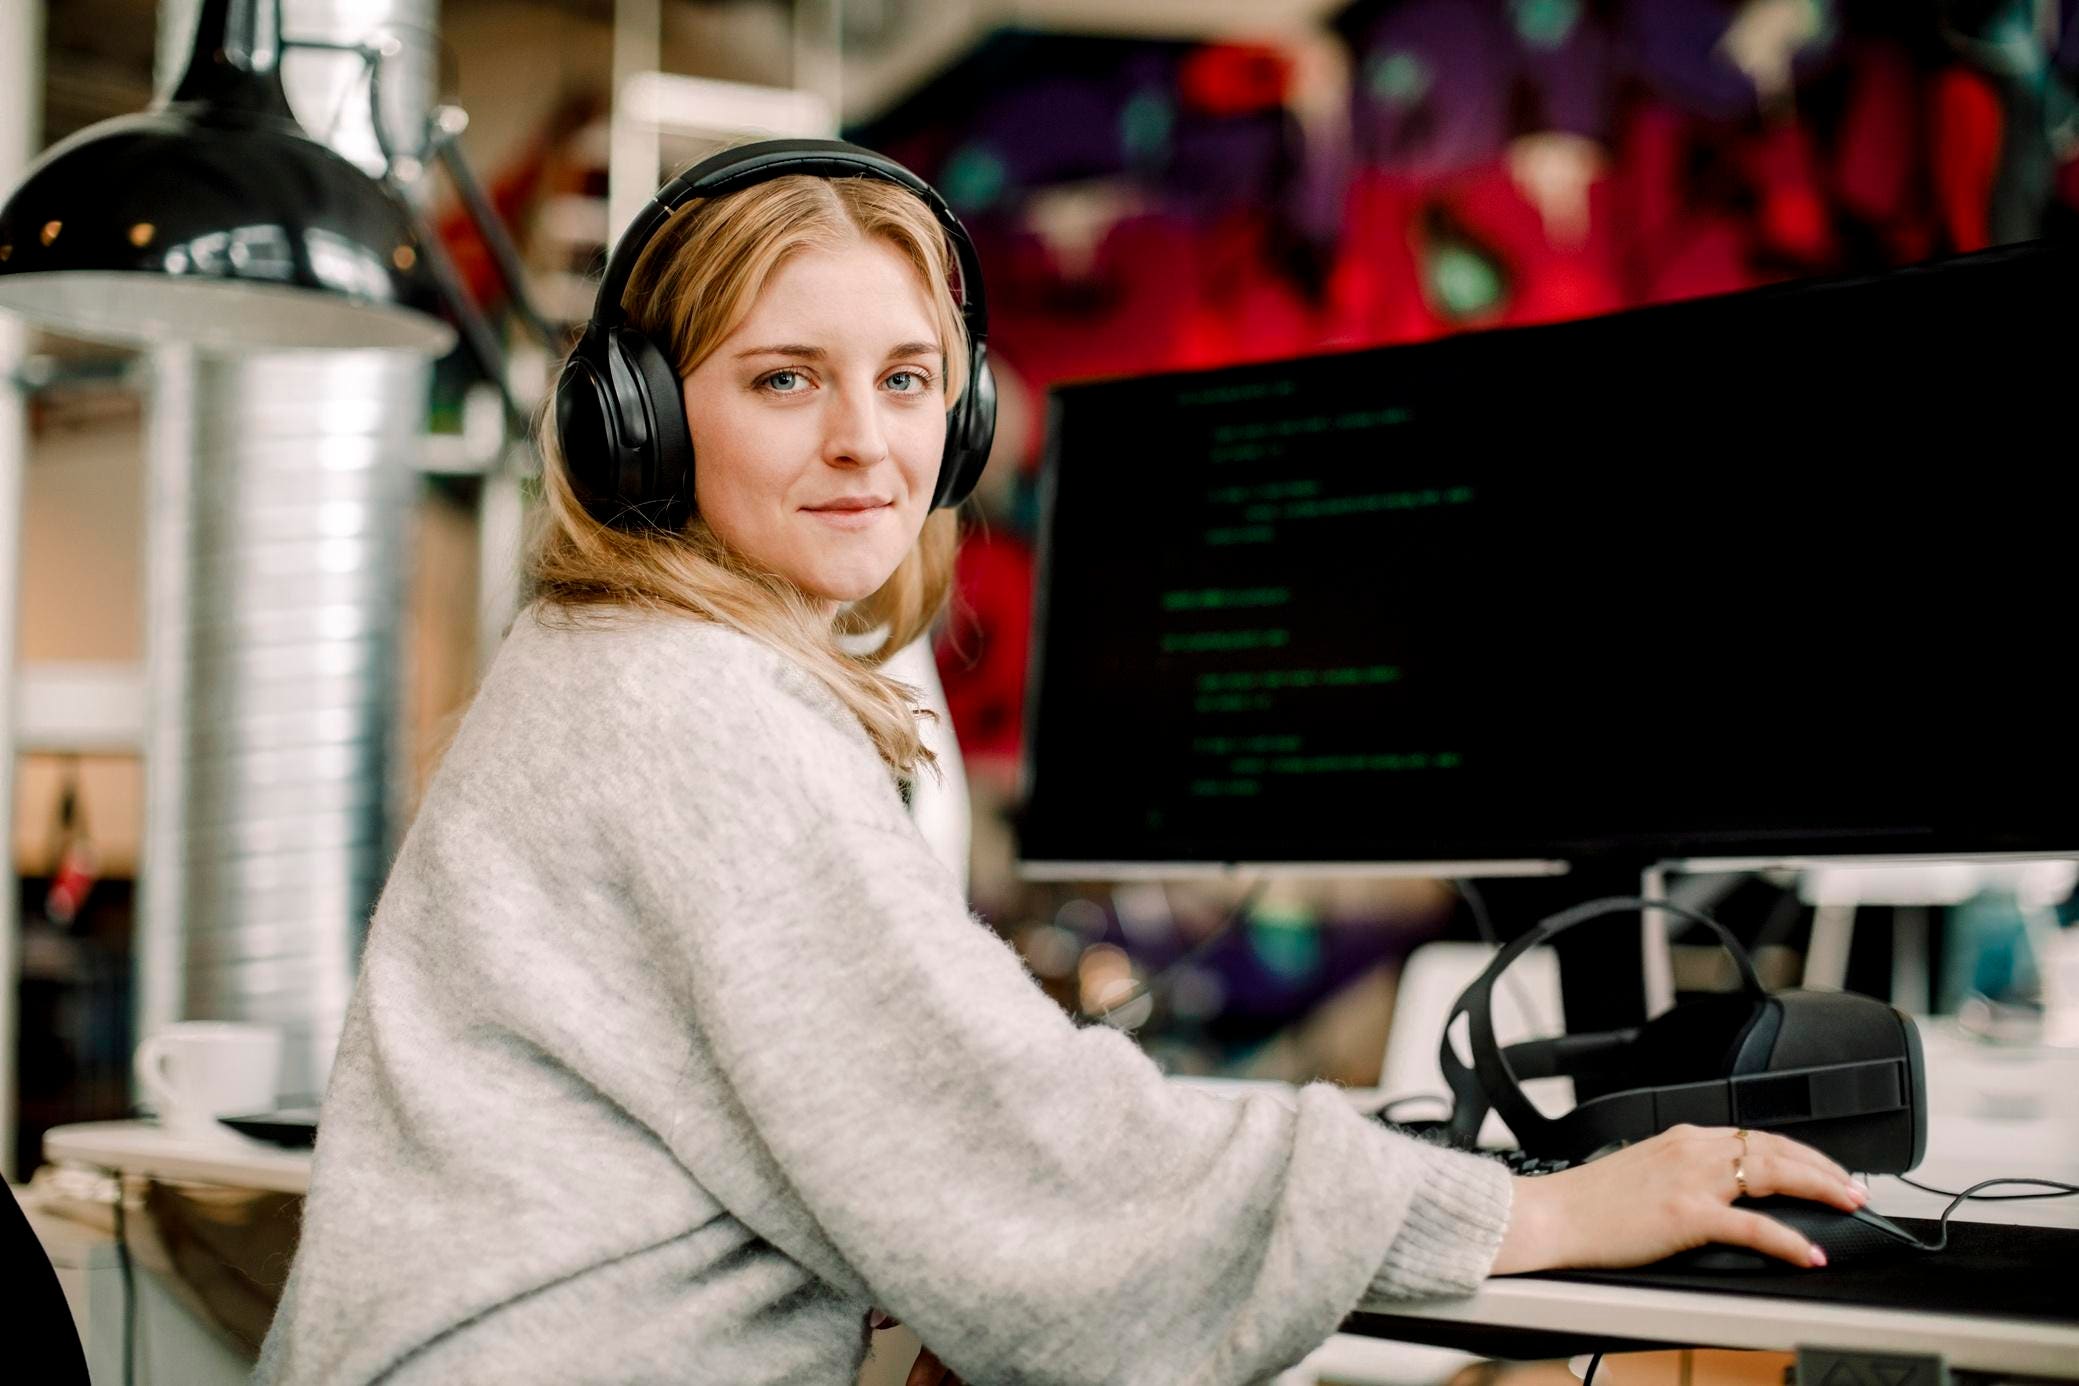 A blonde woman wearing headphones sits at her desk and looks at the camera, representing the team of experts at Fast Fixx who are dedicated to helping businesses comply with the GDPR and protect the personal data of EU citizens.